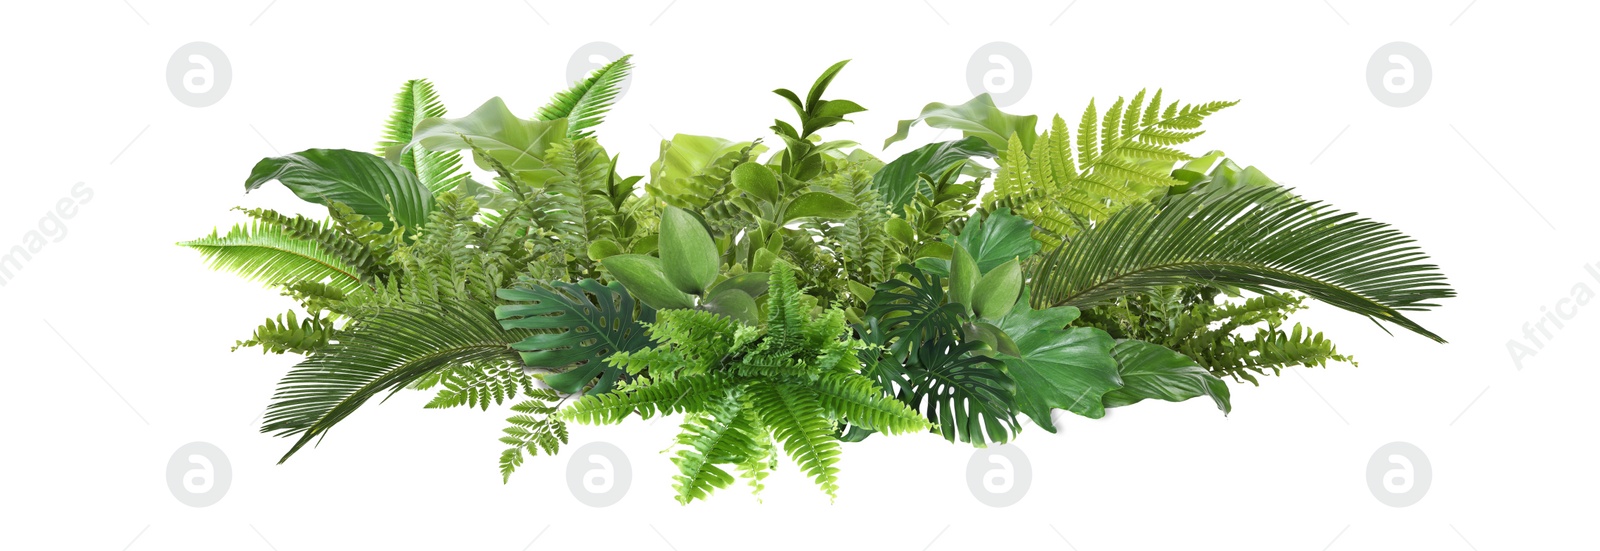 Image of Beautiful composition with fern and other tropical leaves on white background. Banner design